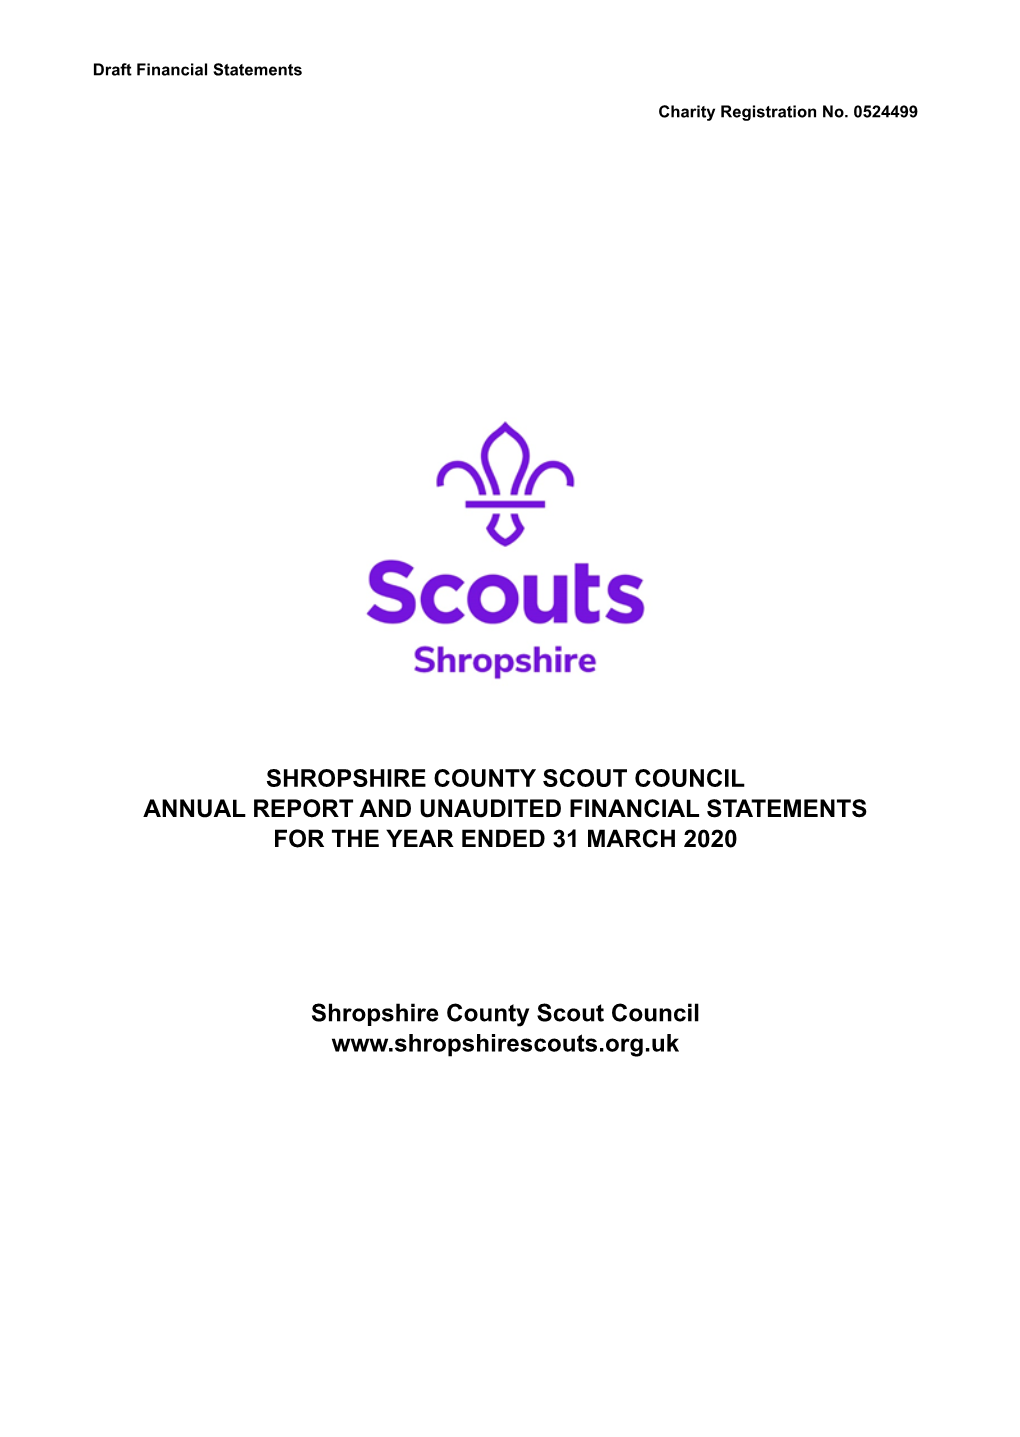 Shropshire County Scout Council Annual Report and Unaudited Financial Statements for the Year Ended 31 March 2020